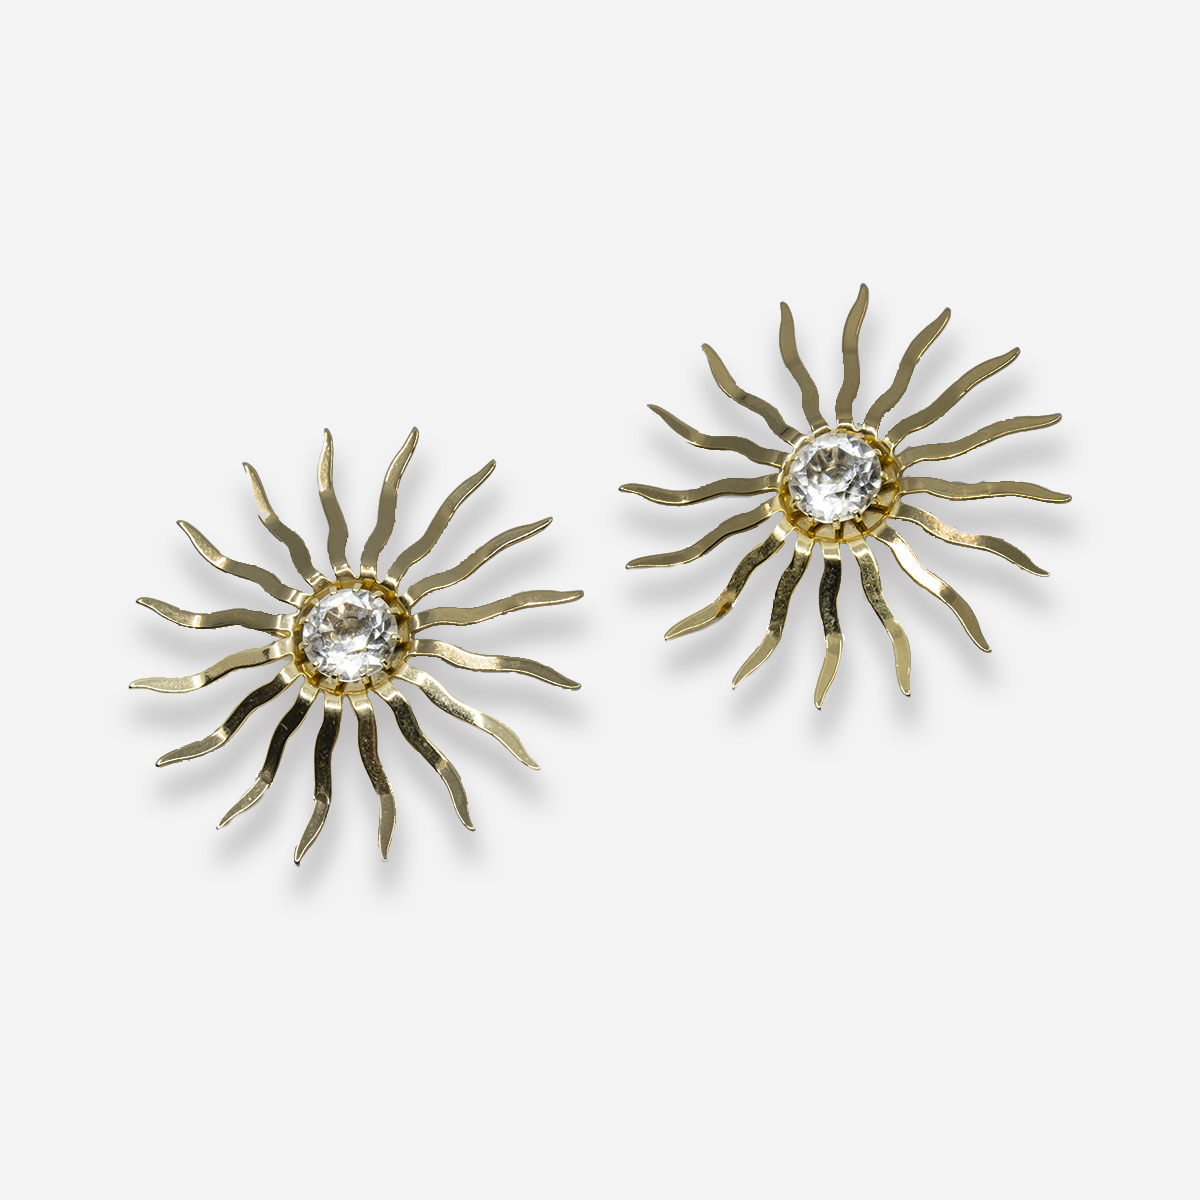 Sarah coventry fascination earrings